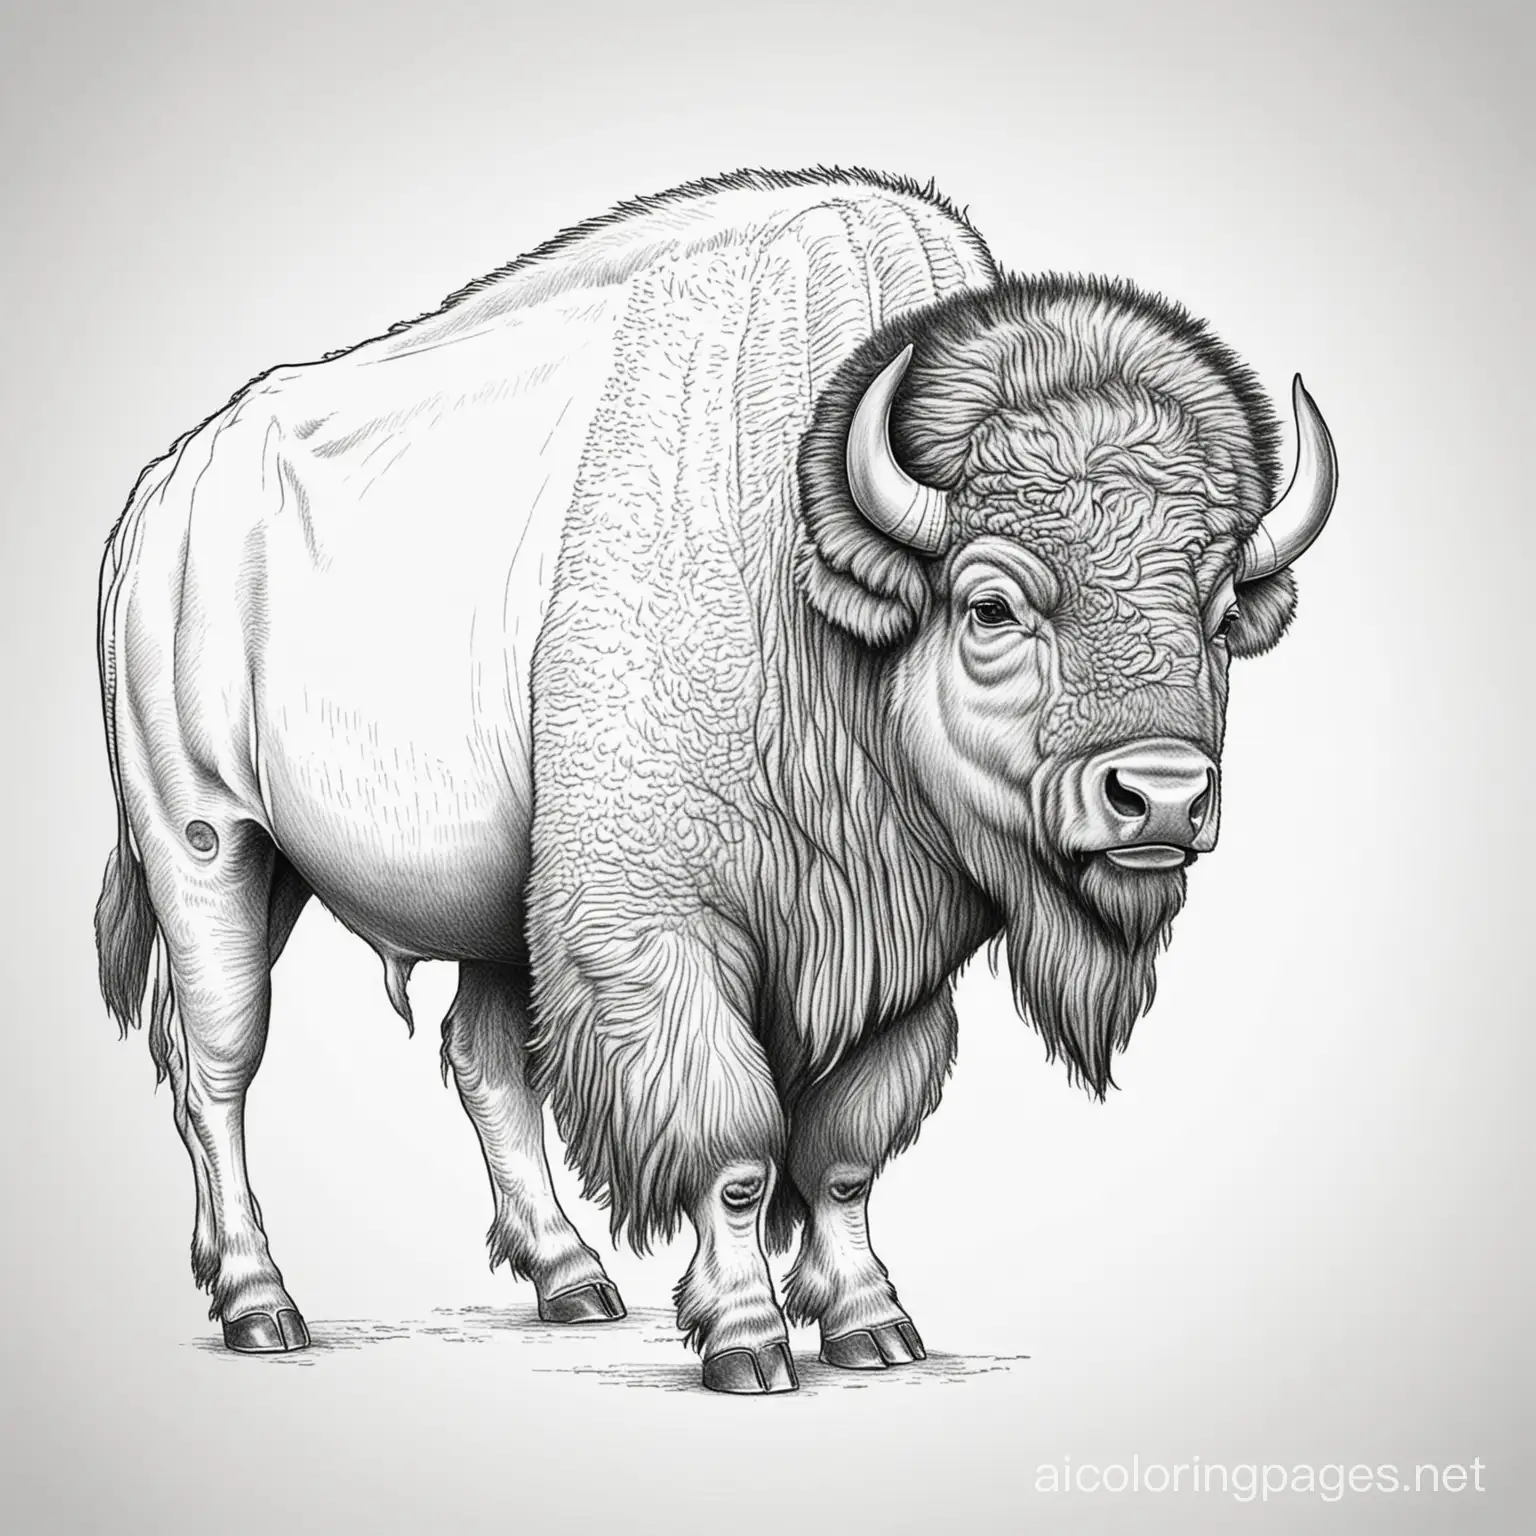 The American bison, Coloring Page, black and white, line art, white background, Simplicity, Ample White Space. The background of the coloring page is plain white to make it easy for young children to color within the lines. The outlines of all the subjects are easy to distinguish, making it simple for kids to color without too much difficulty